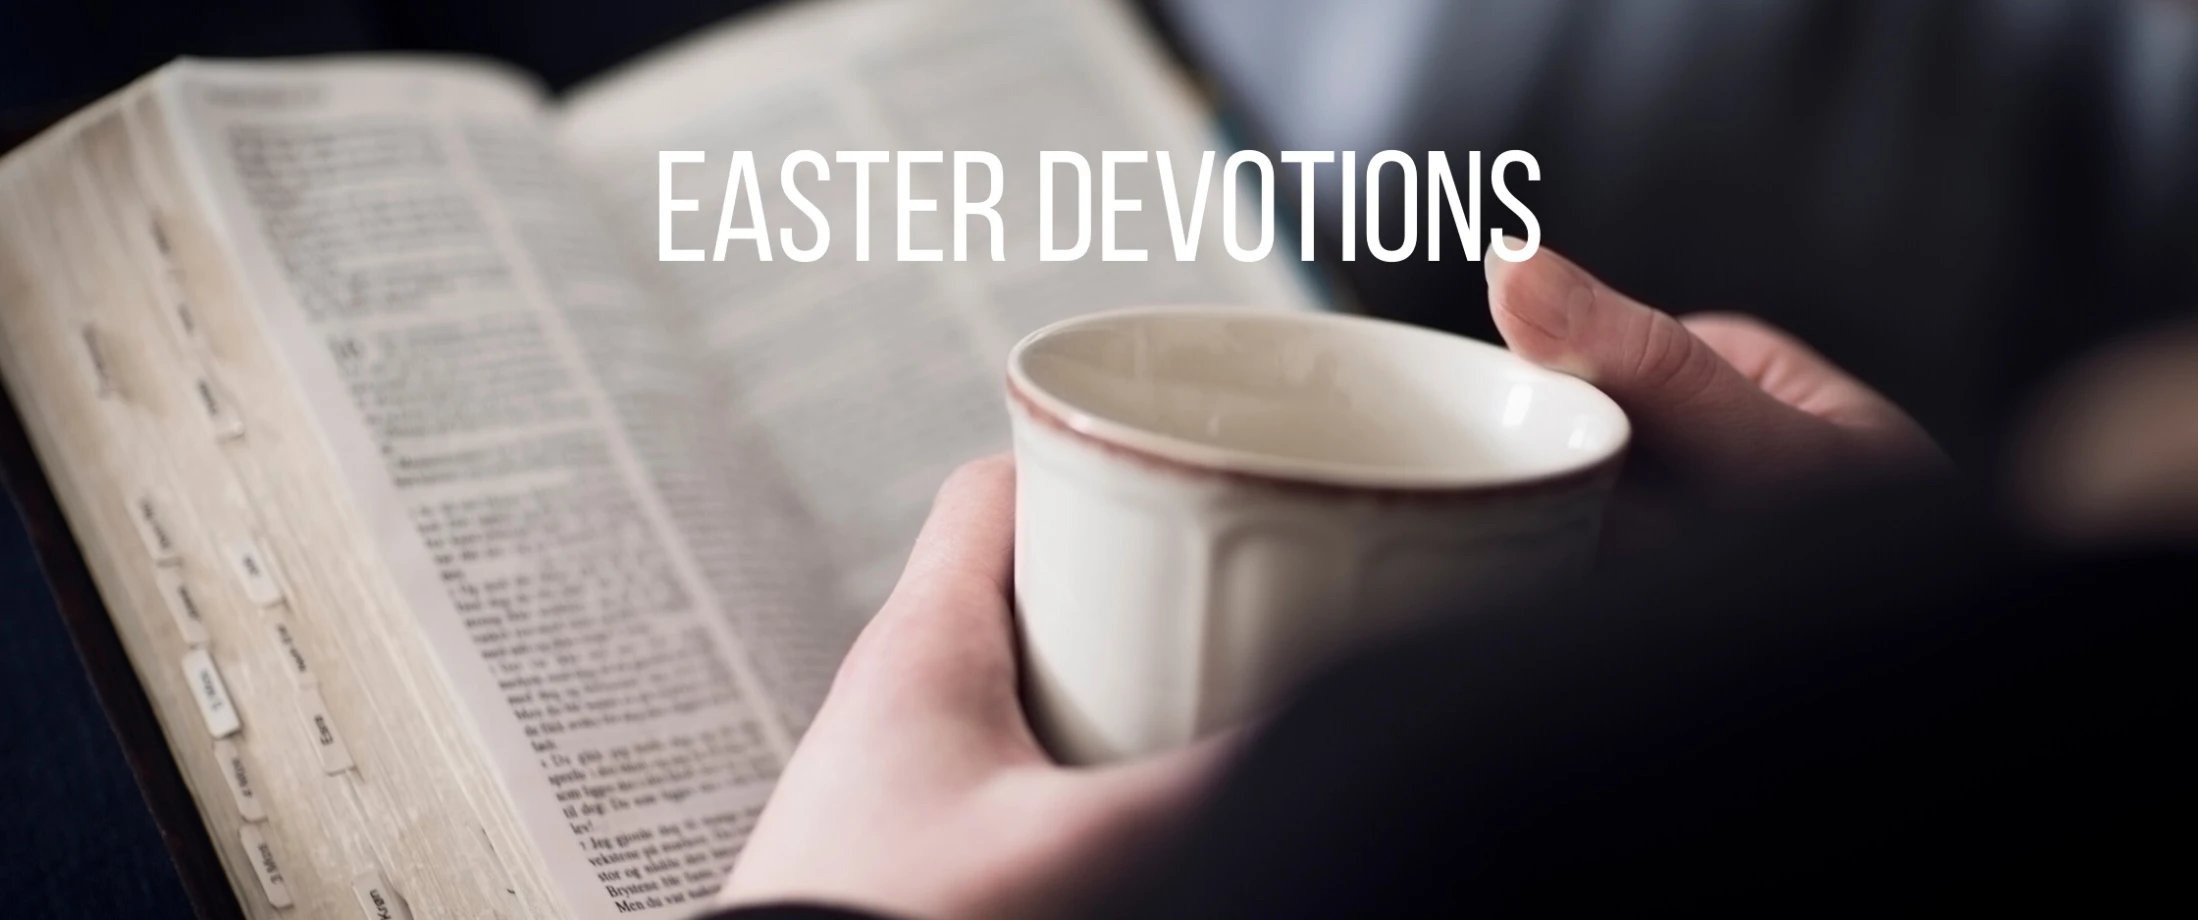 Easter Devotions: The Church and the Saints in the Creed